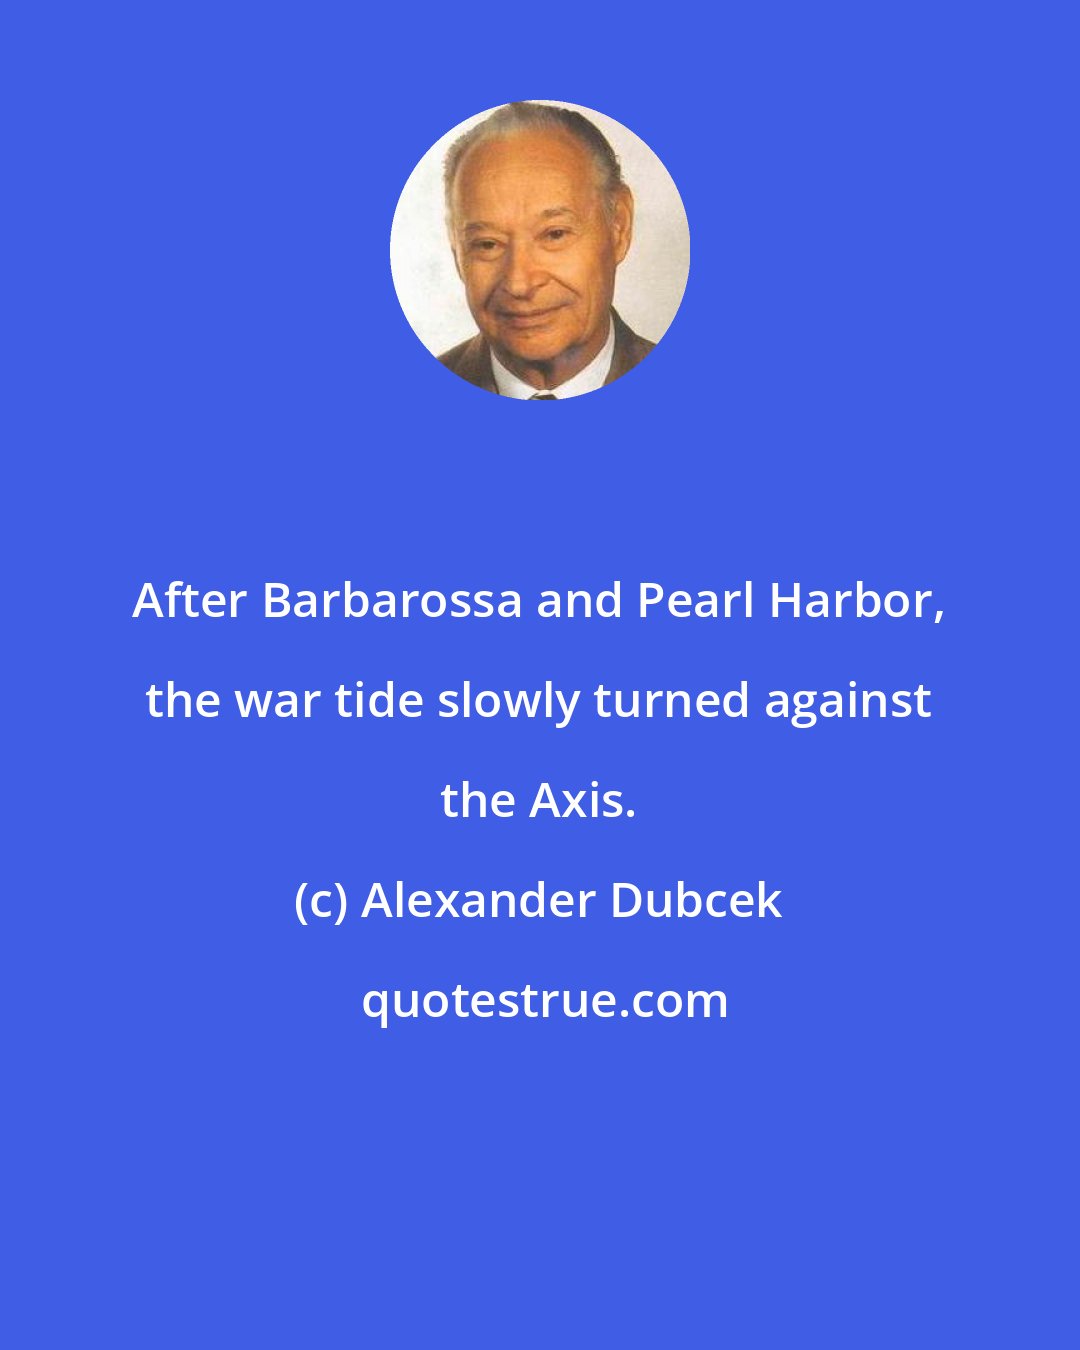 Alexander Dubcek: After Barbarossa and Pearl Harbor, the war tide slowly turned against the Axis.